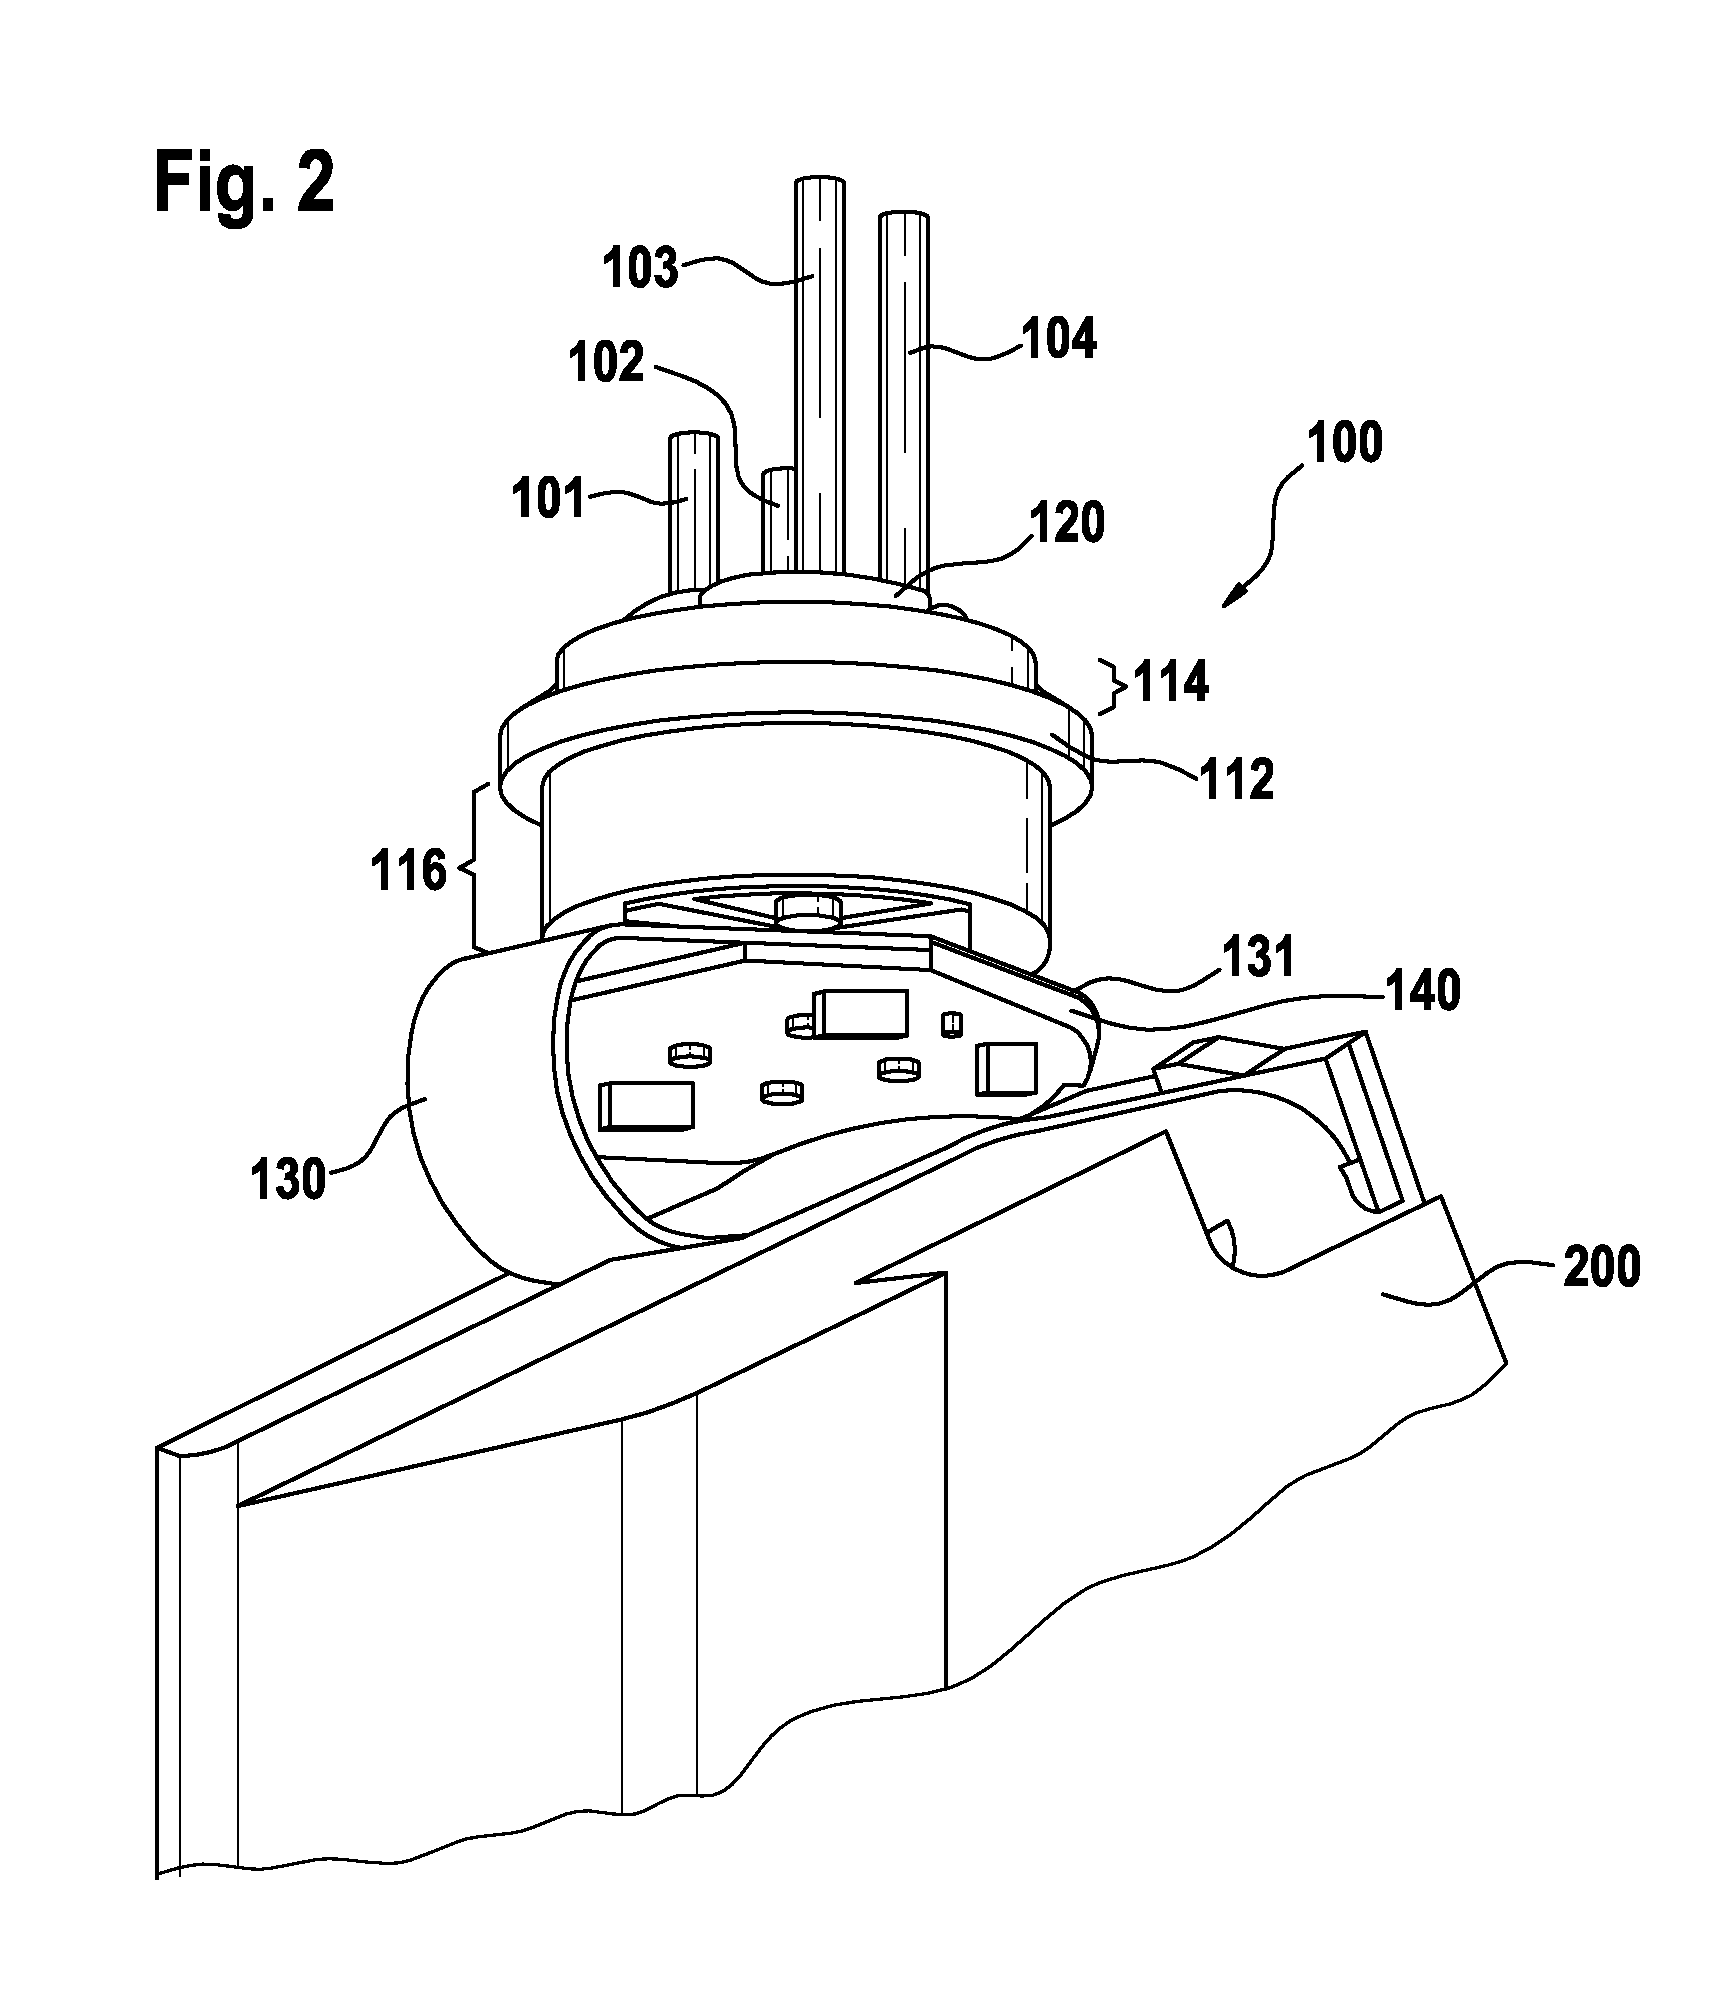 Filtering assembly and a feedthrough assembly